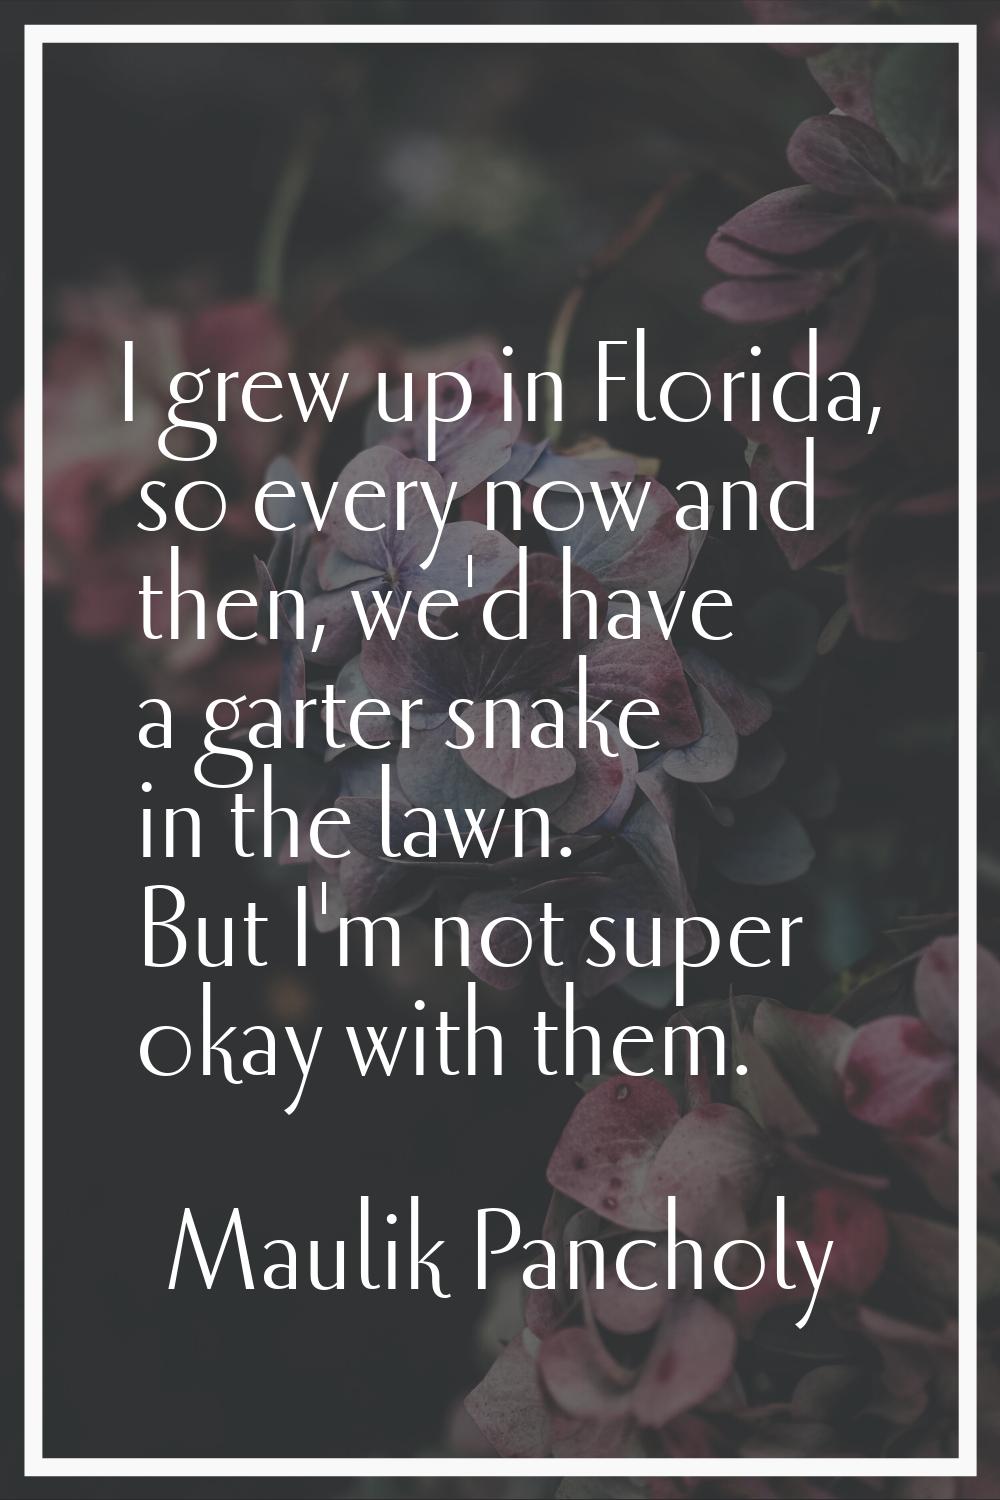 I grew up in Florida, so every now and then, we'd have a garter snake in the lawn. But I'm not supe